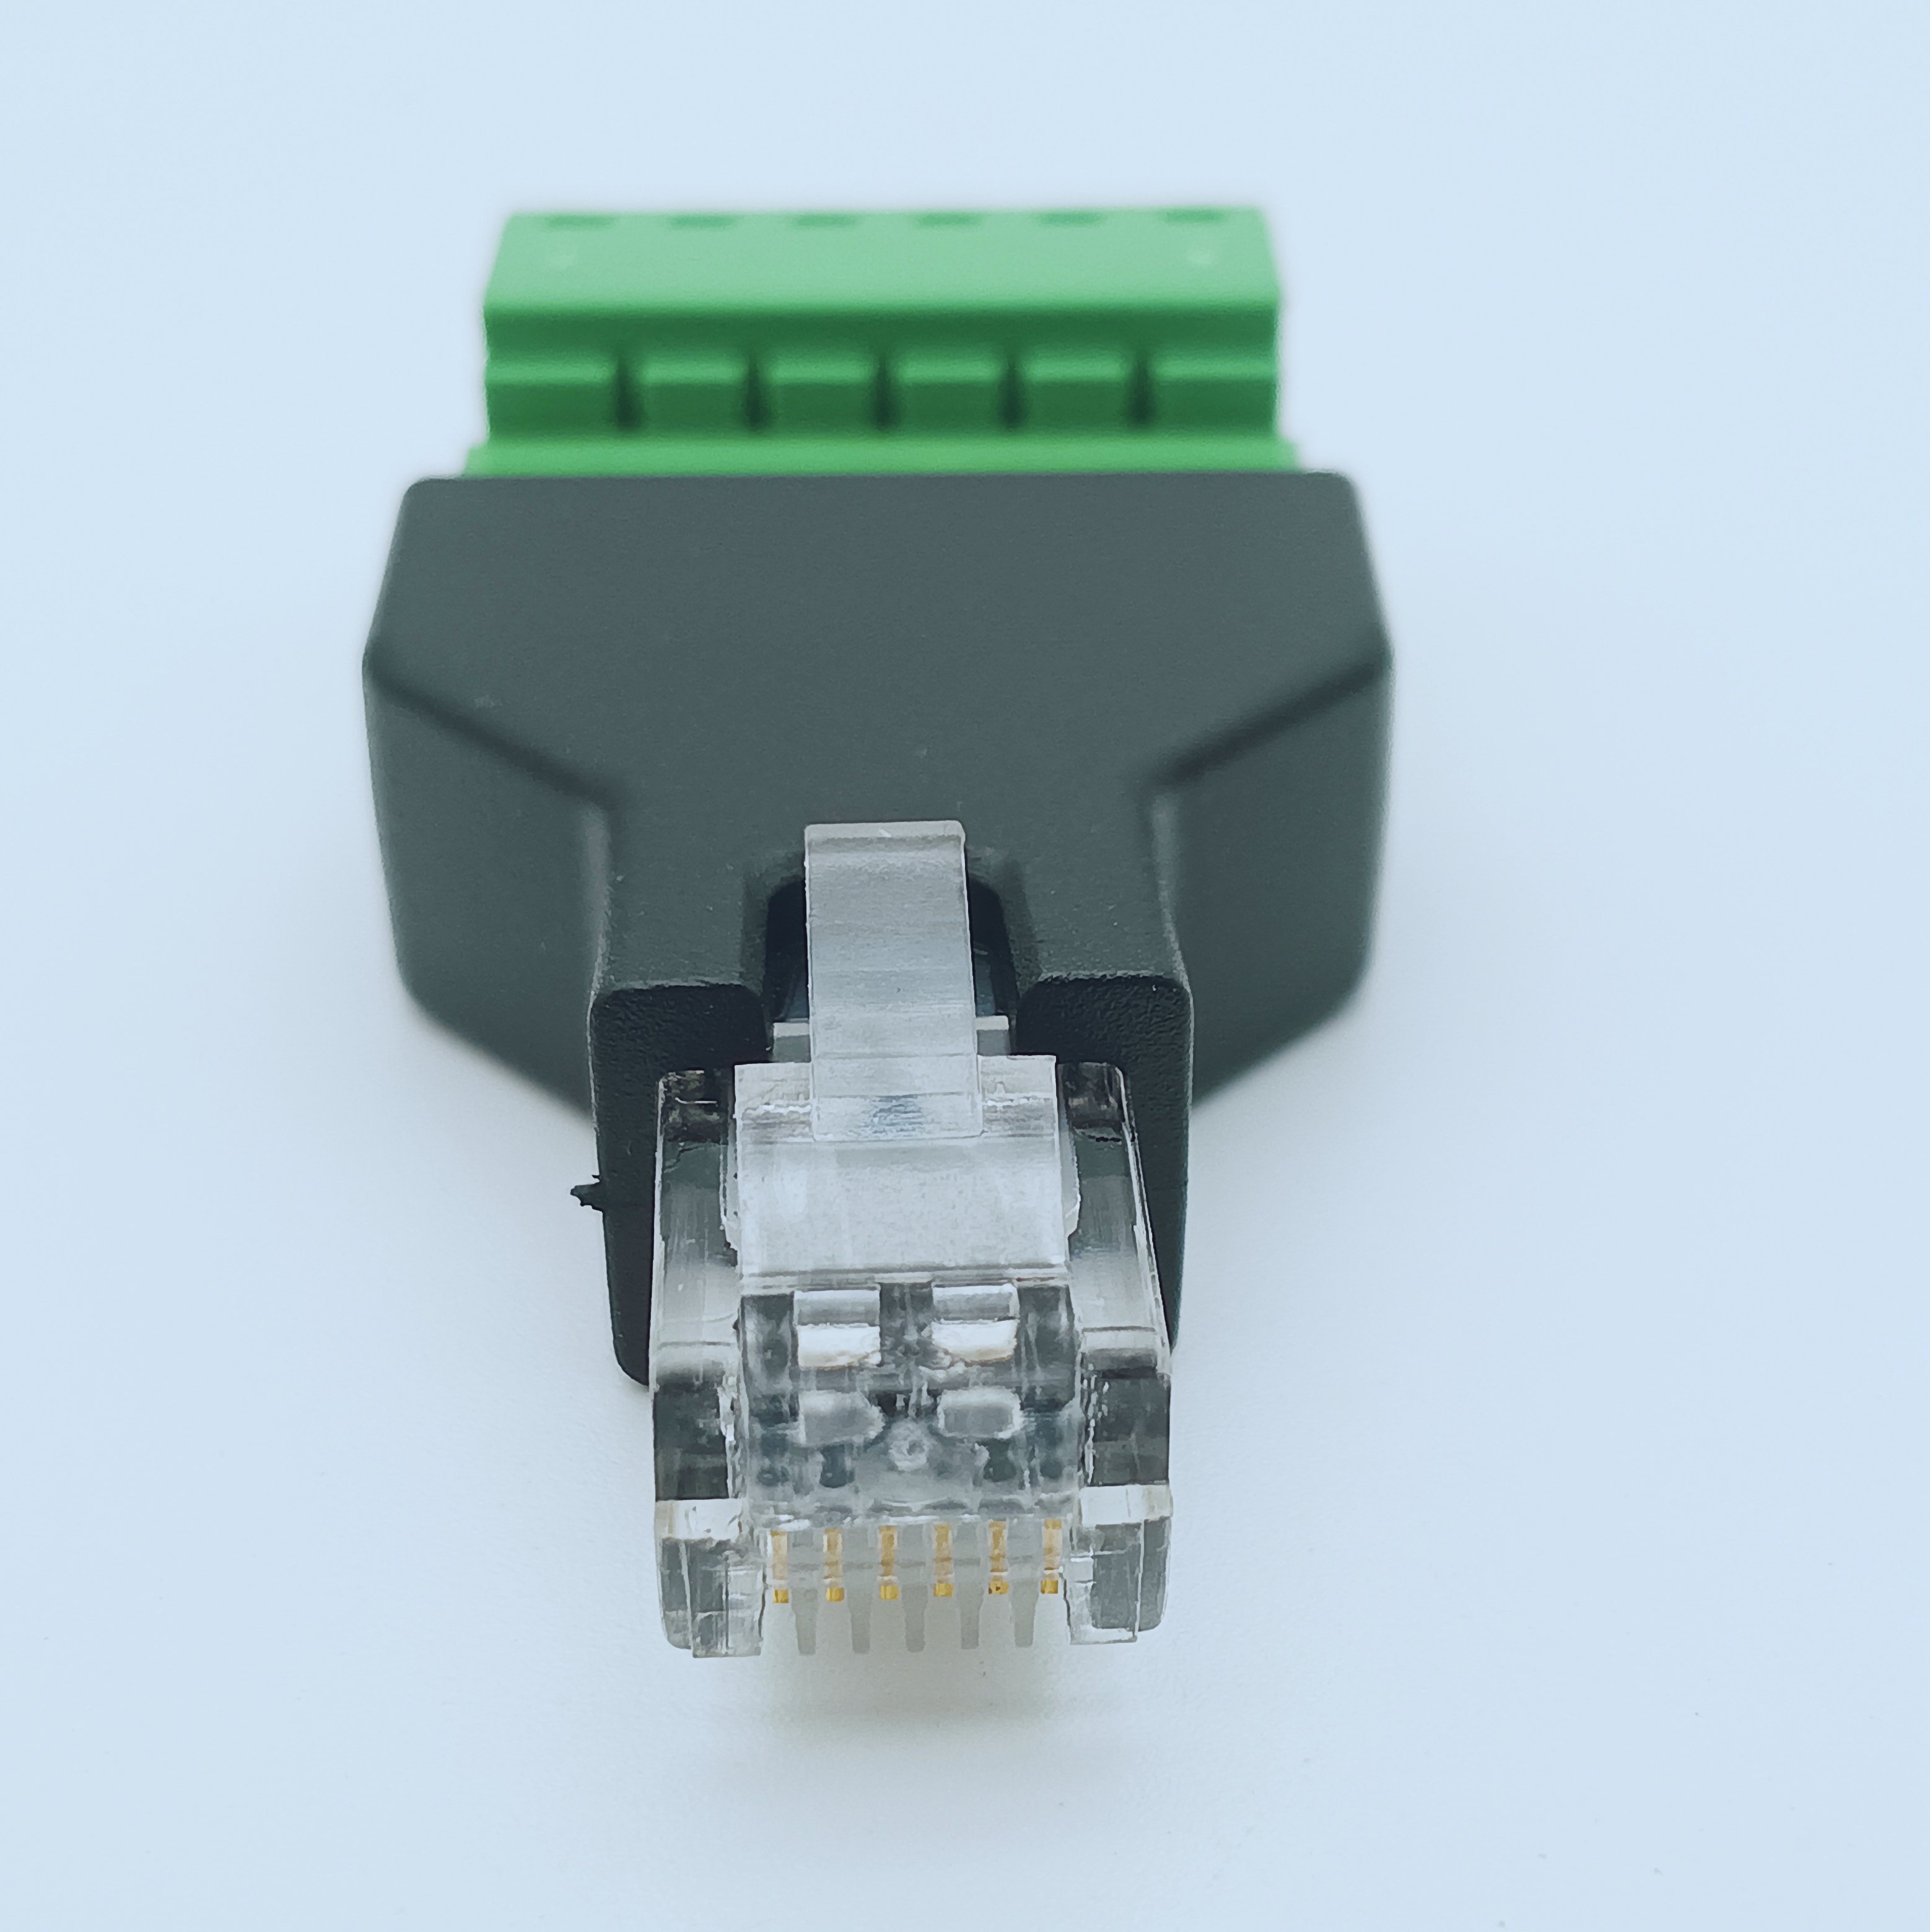 Ethernet RJ12 6P6C Male to 6 Pin Screw Terminals Adapter Connector RJ45 Splitter For DVR CCTV Access